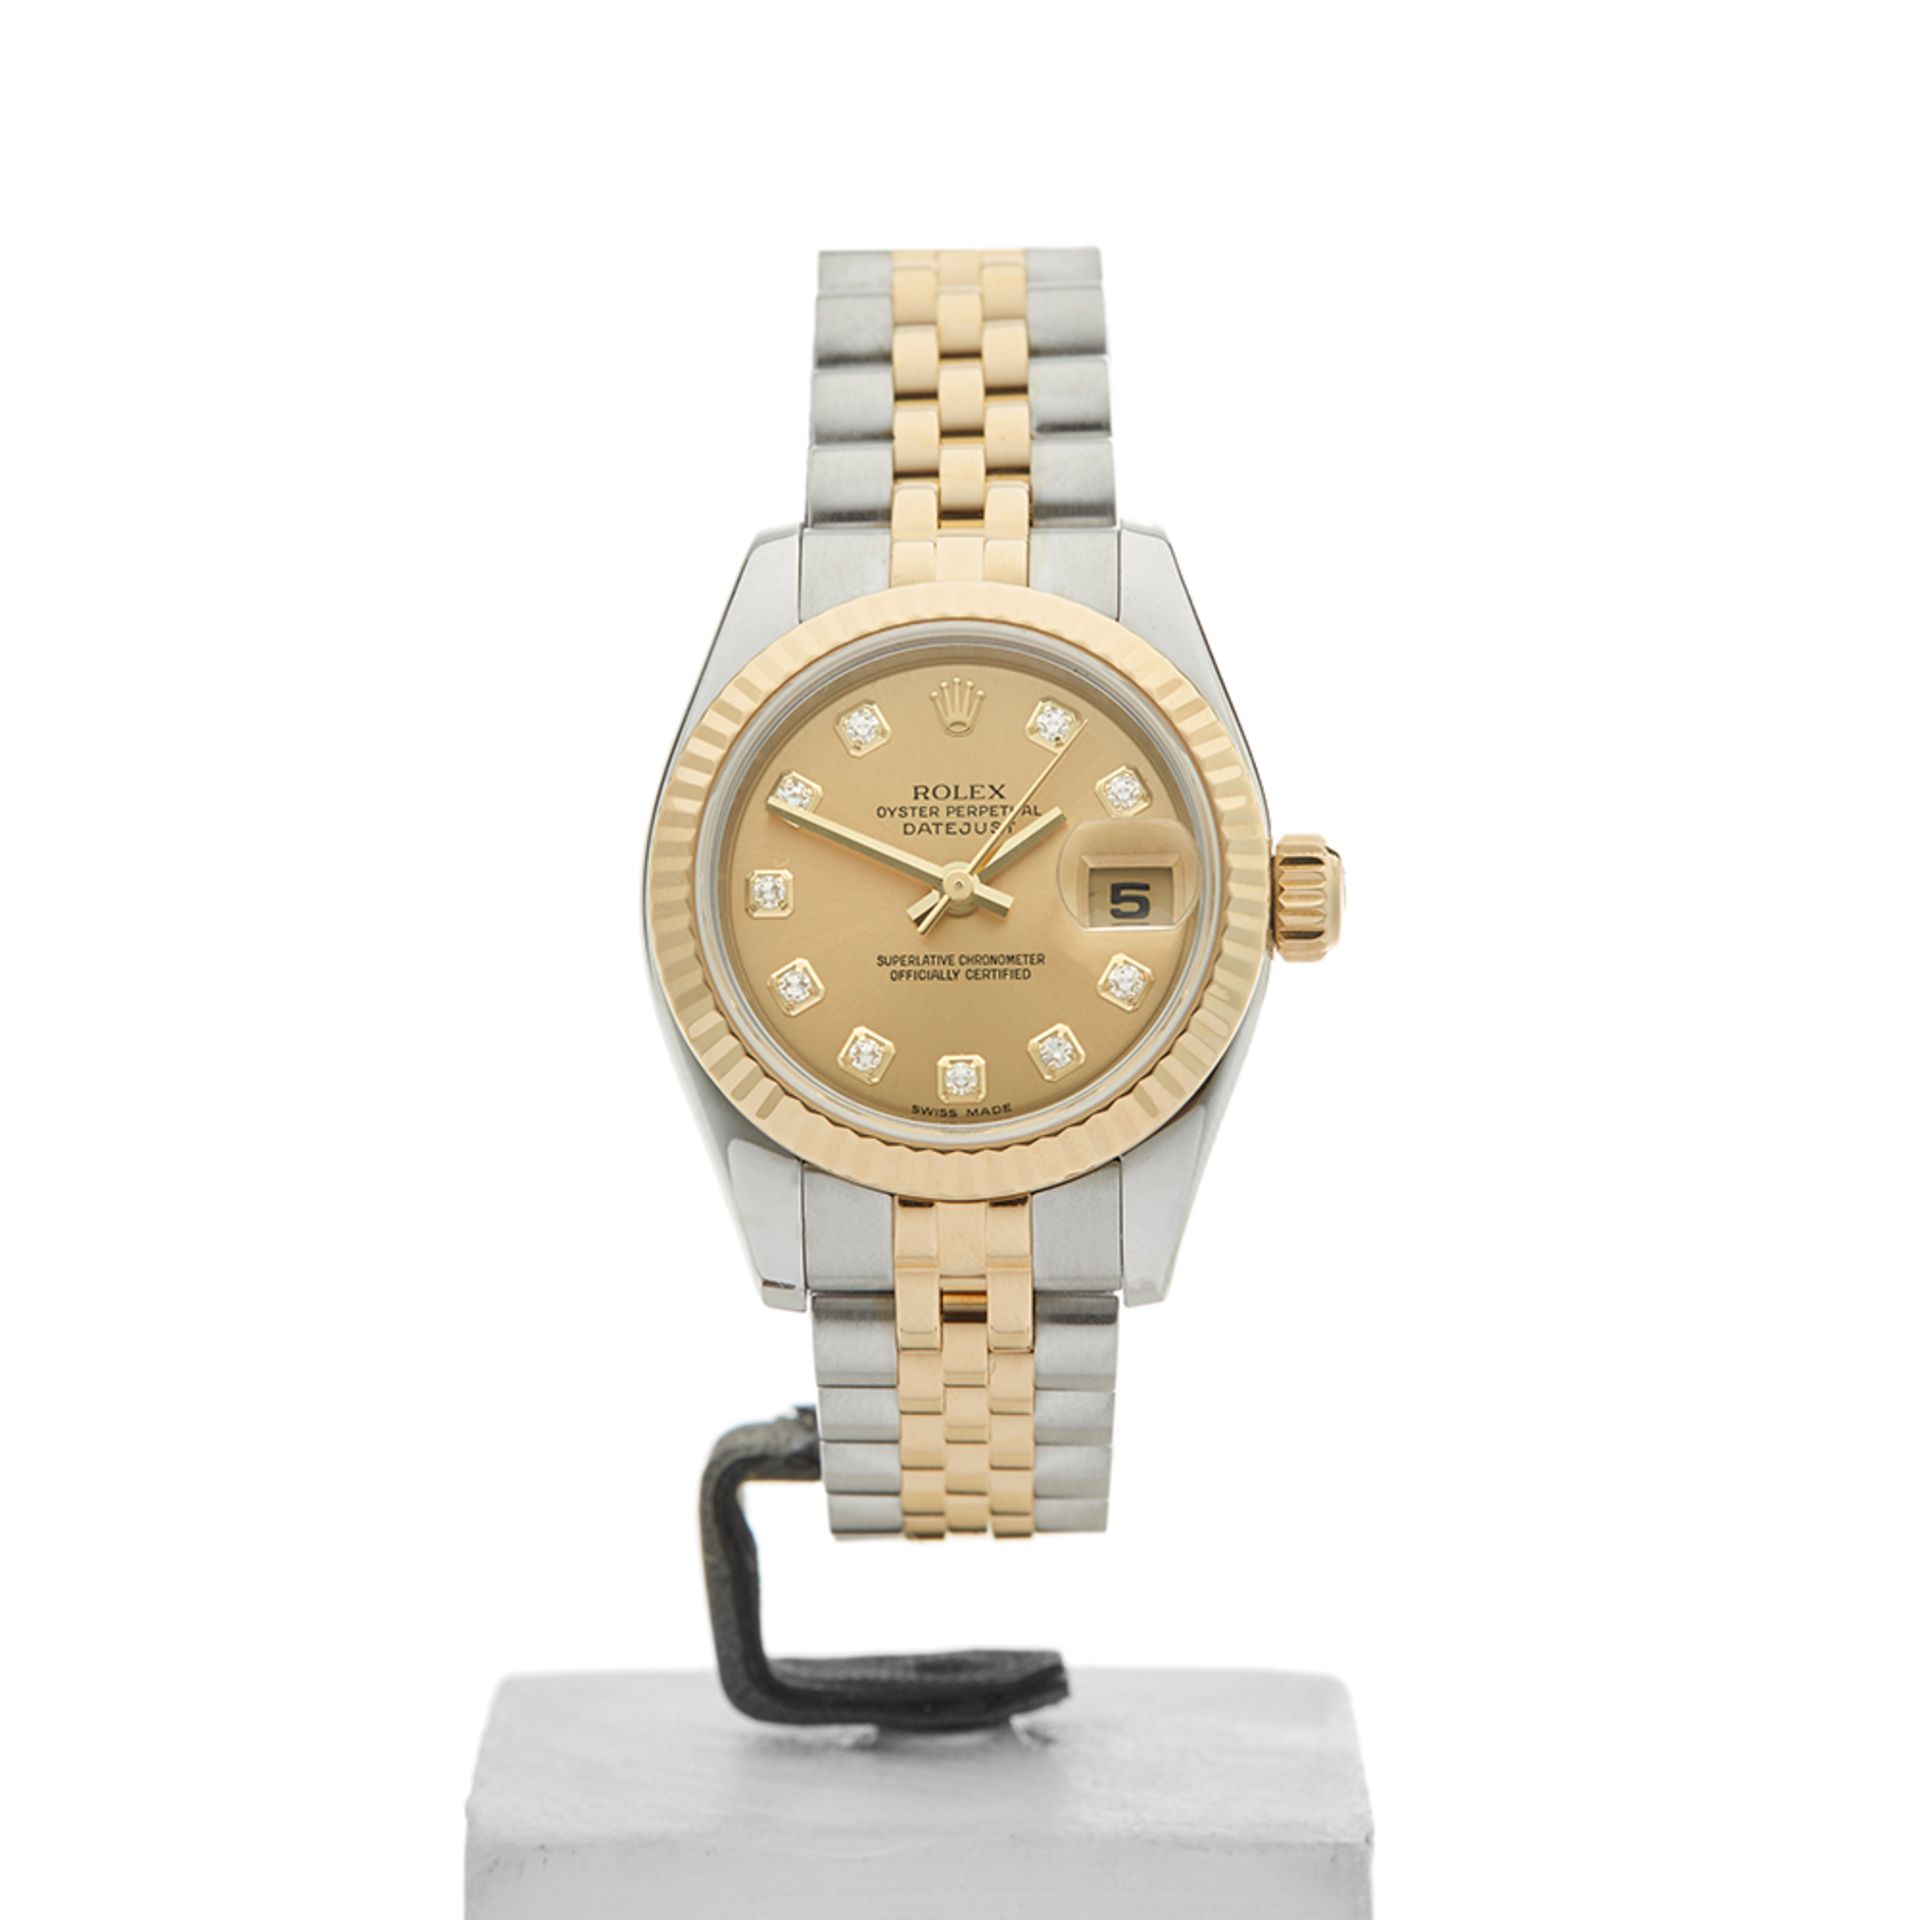 Rolex Datejust 26mm Stainless Steel & 18k Yellow Gold - 179173 - Image 2 of 9